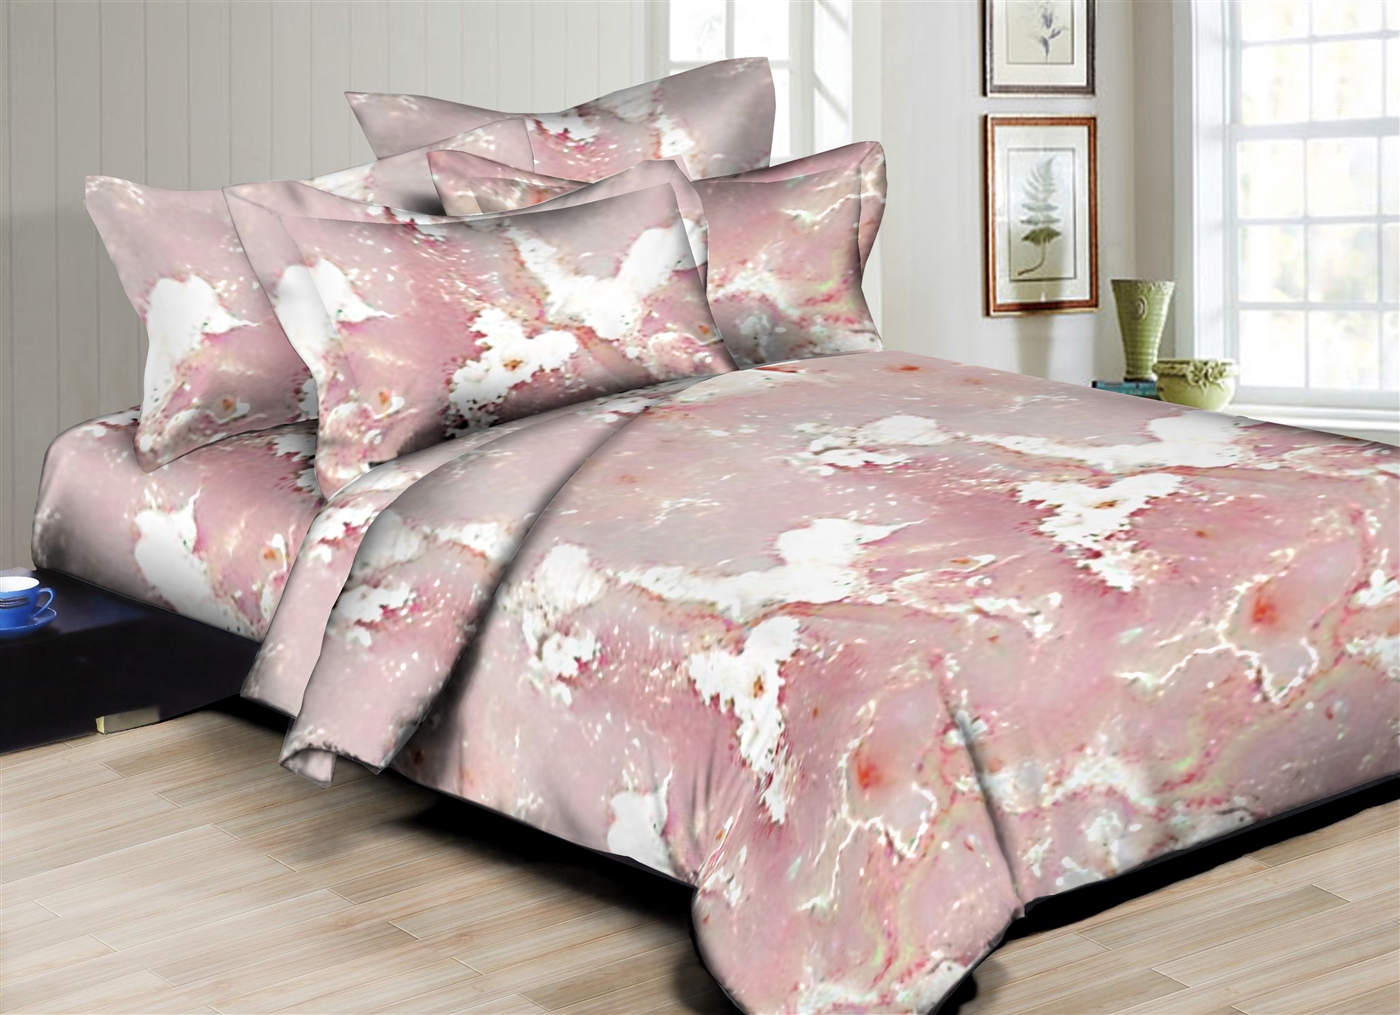 Better Bed Collection: Pretty Pink 8PC Bedding Sets - 300 Thread Count